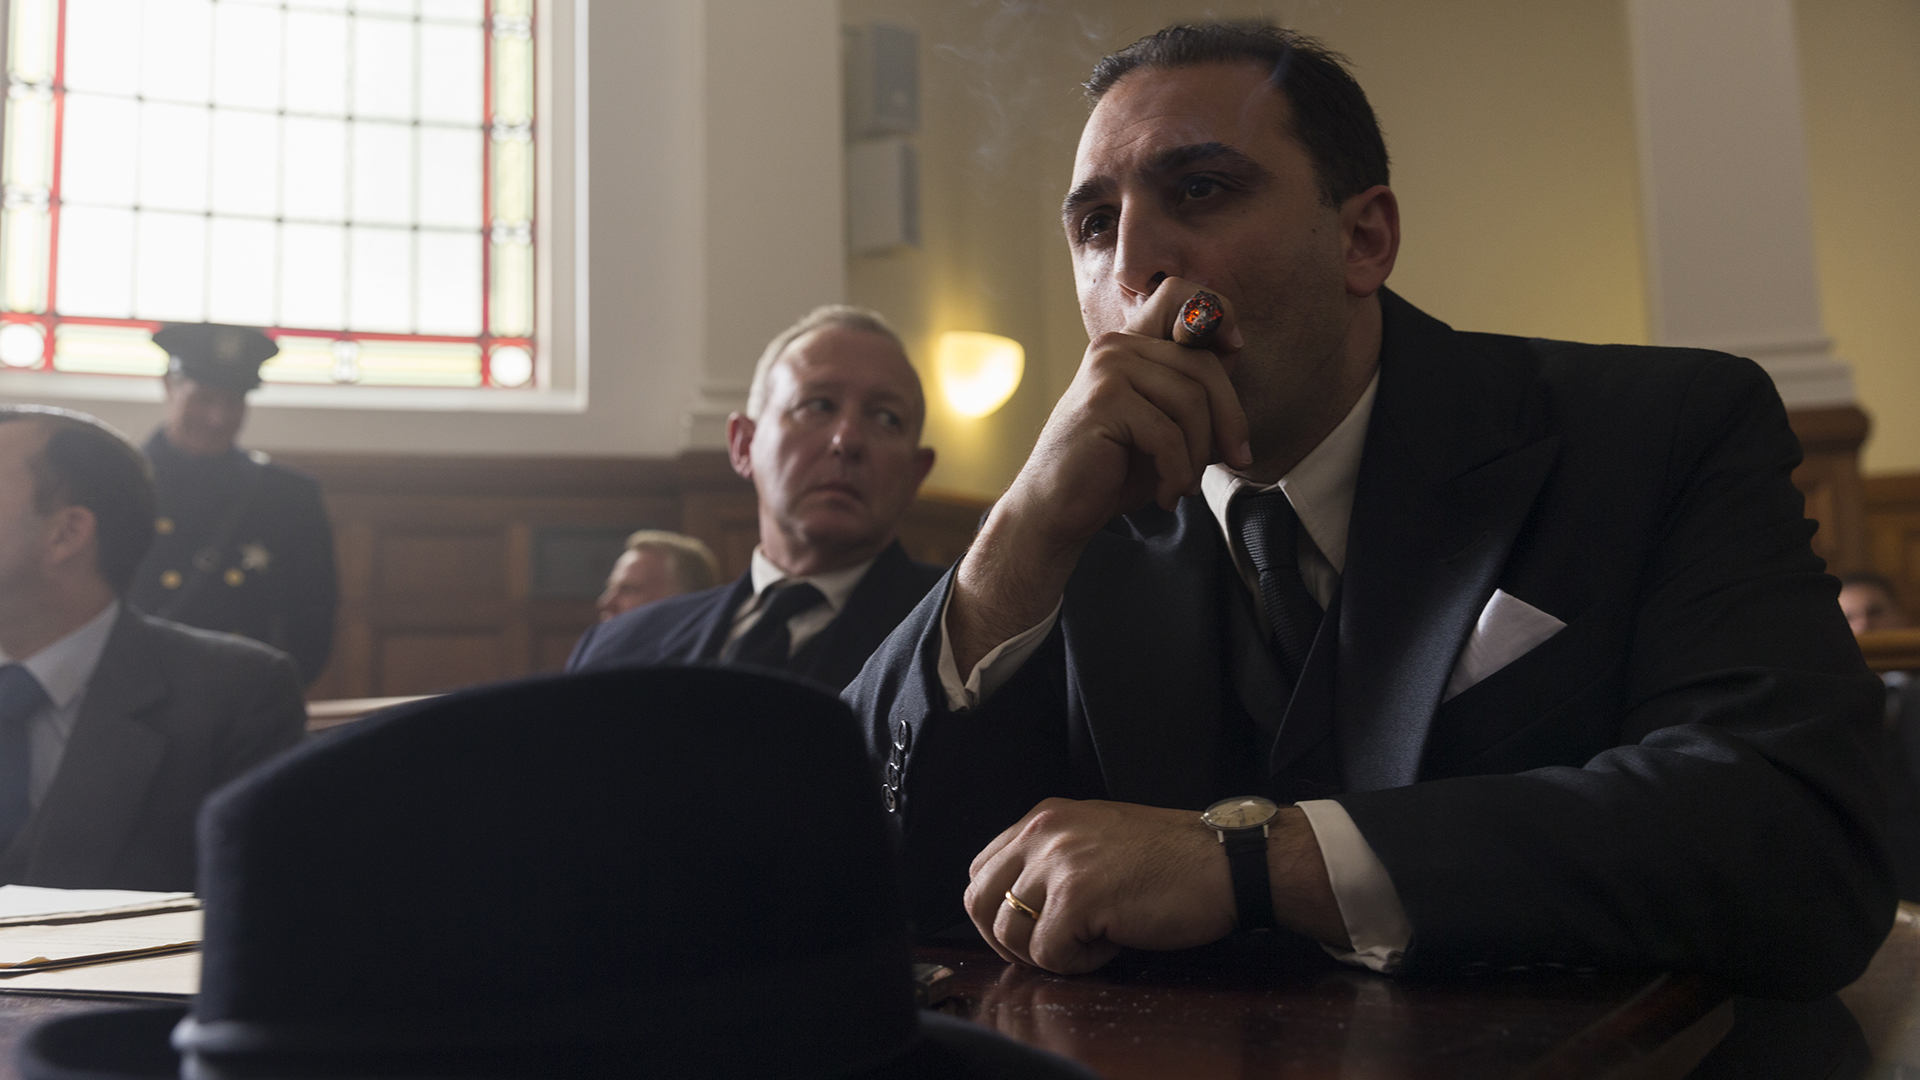 Judgment Day, An undercover agent endangers Capone., TV-14, Season 1002399, Episode 5